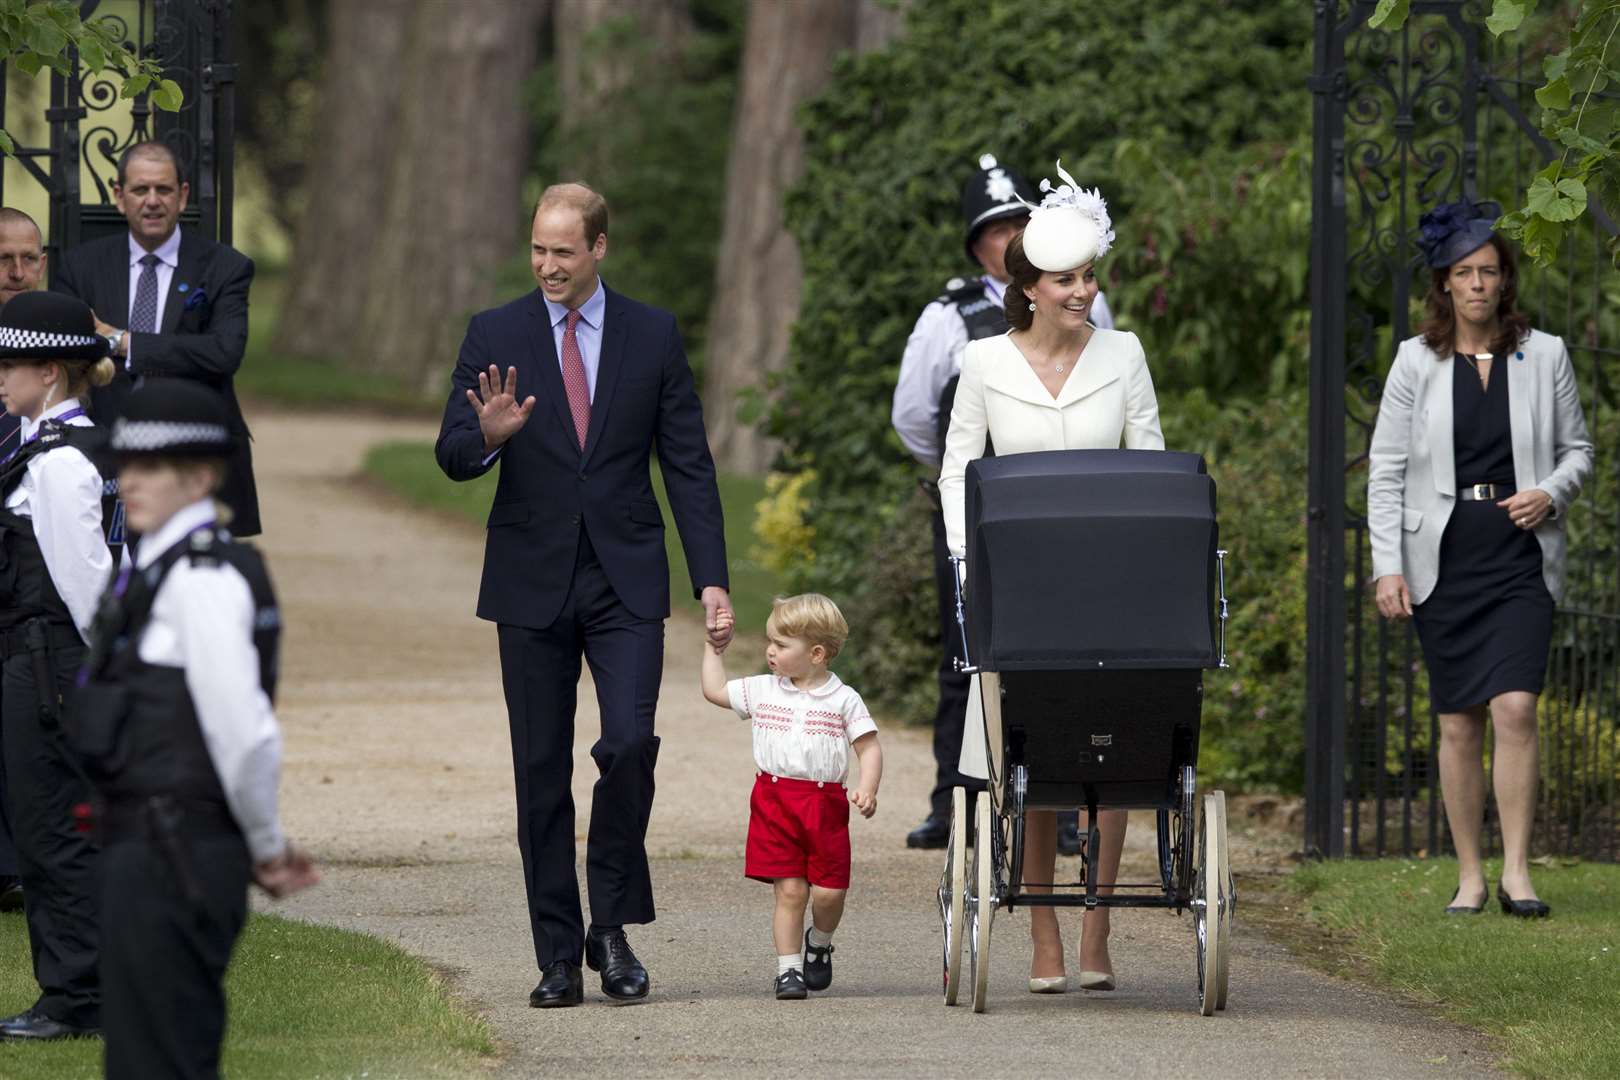 The Duke and Duchess of Cambridge with Prince George and Princess Charlotte in a vintage pram, as they arrive for Charlotte’s christening (Matt Dunham/PA)